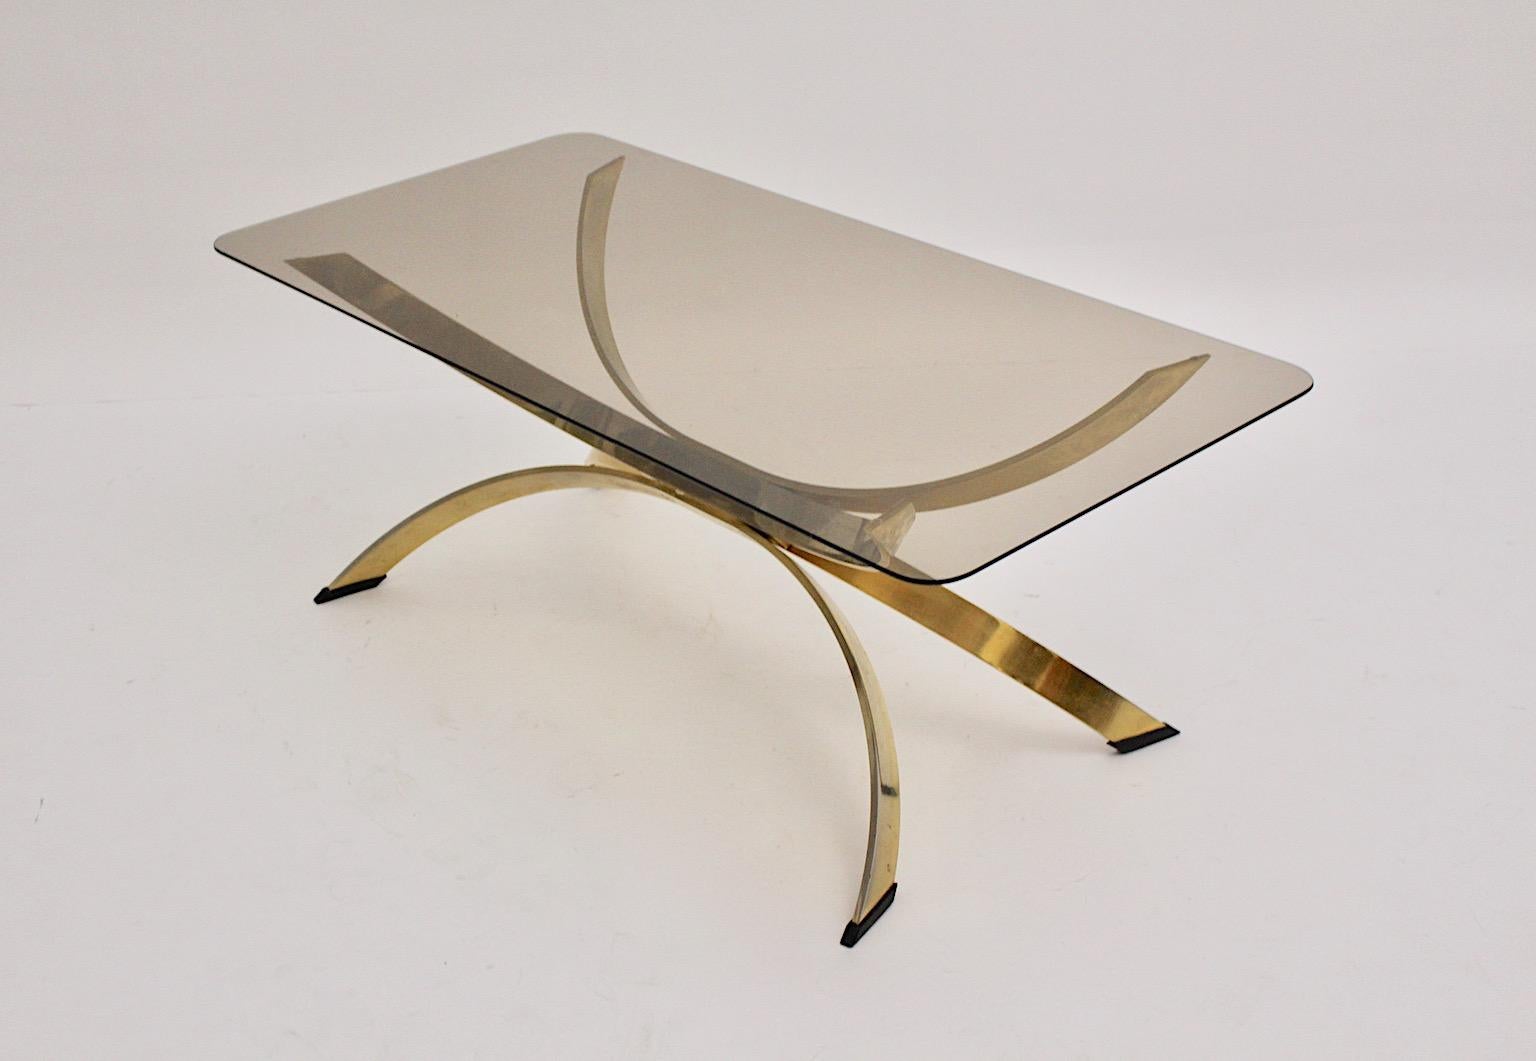 Brassed Metal Smoked Glass Sculptural Vintage Coffee Table Sofa Table 1970s For Sale 4